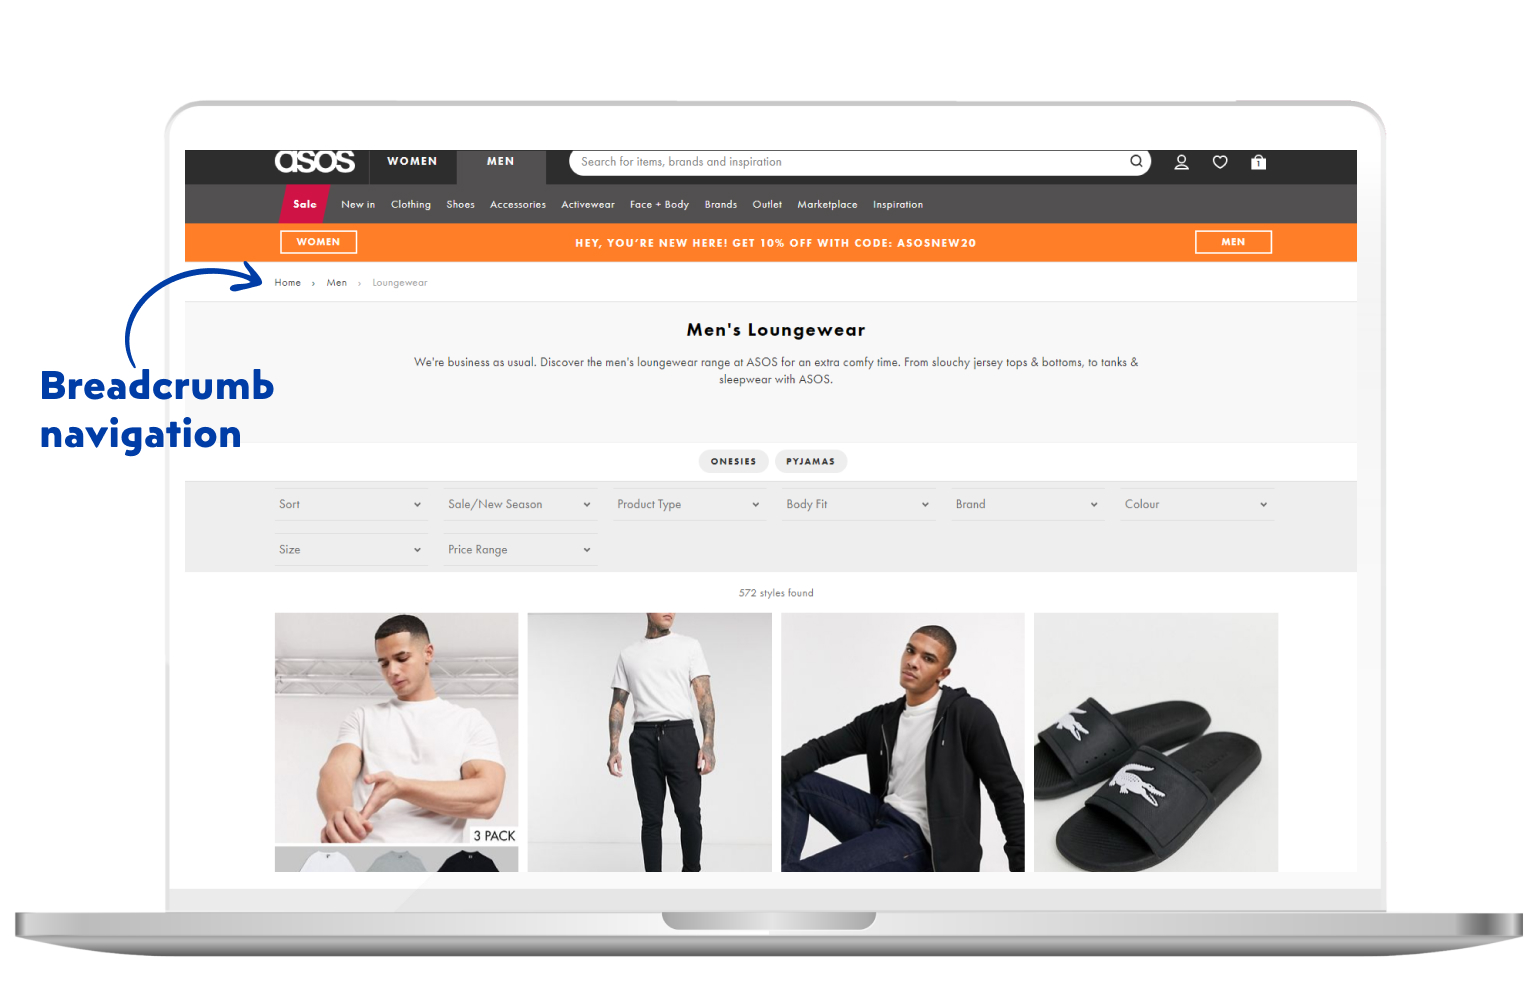 Ultimate list of eCommerce website features